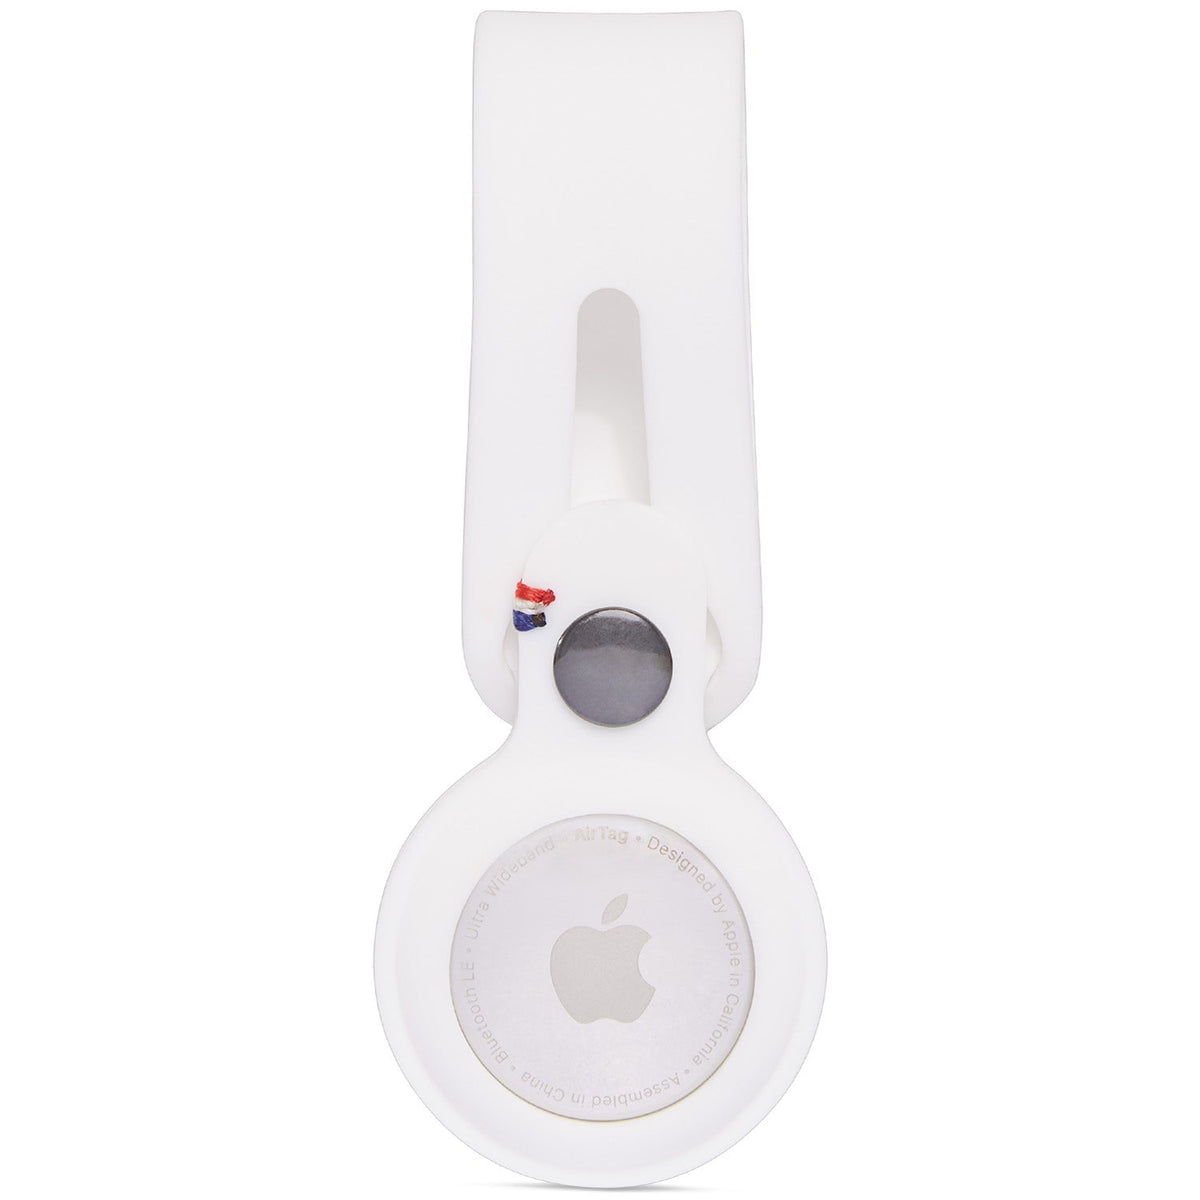 Genuine Apple AirTag Loop Case Cover - White MX4F2ZM/A Open Box